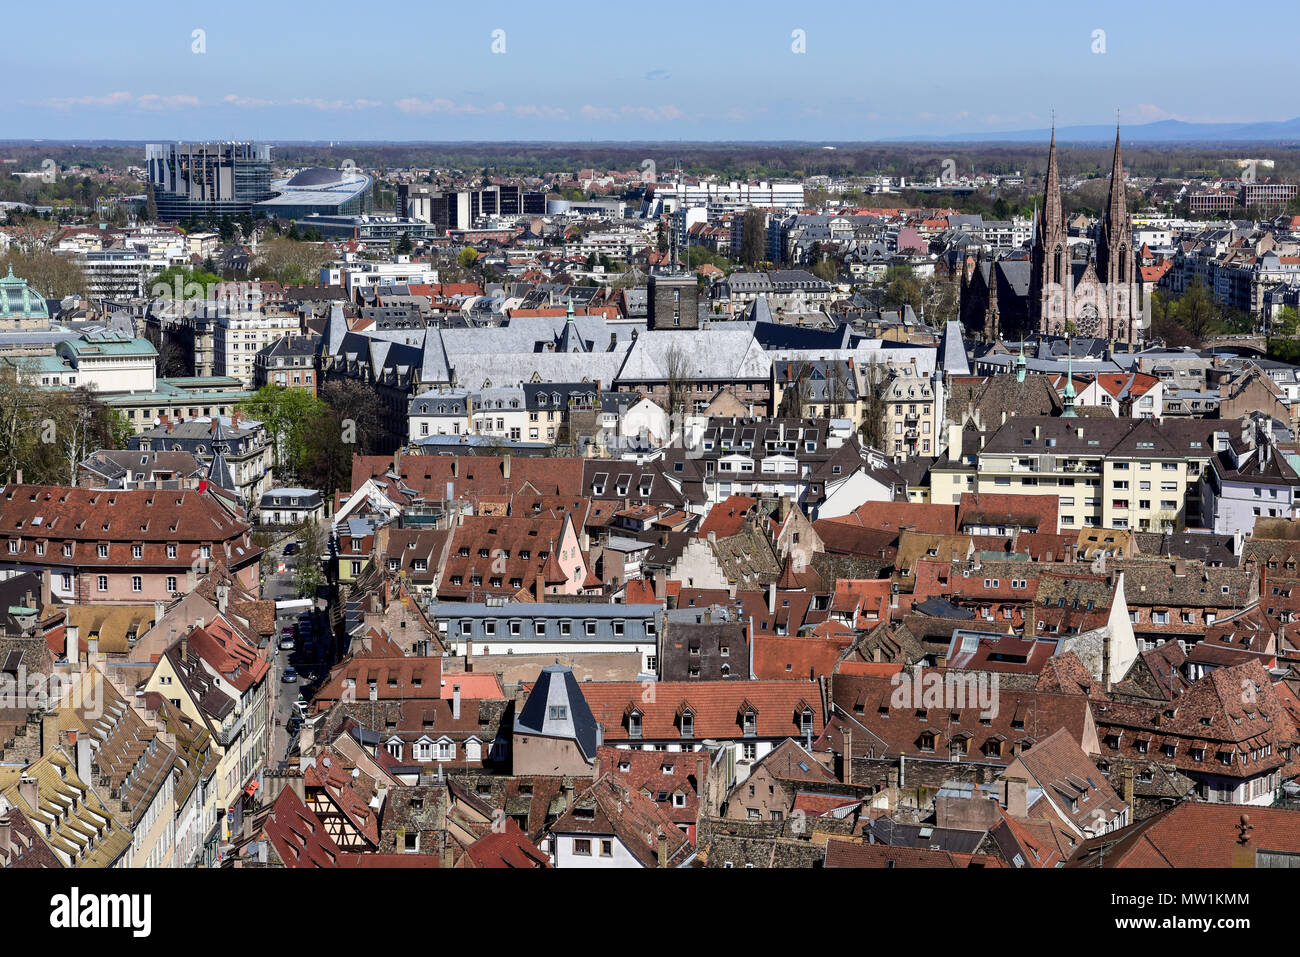 City view with old town, behind European Parliament and St. Paul's Church, Strasbourg, France Stock Photo